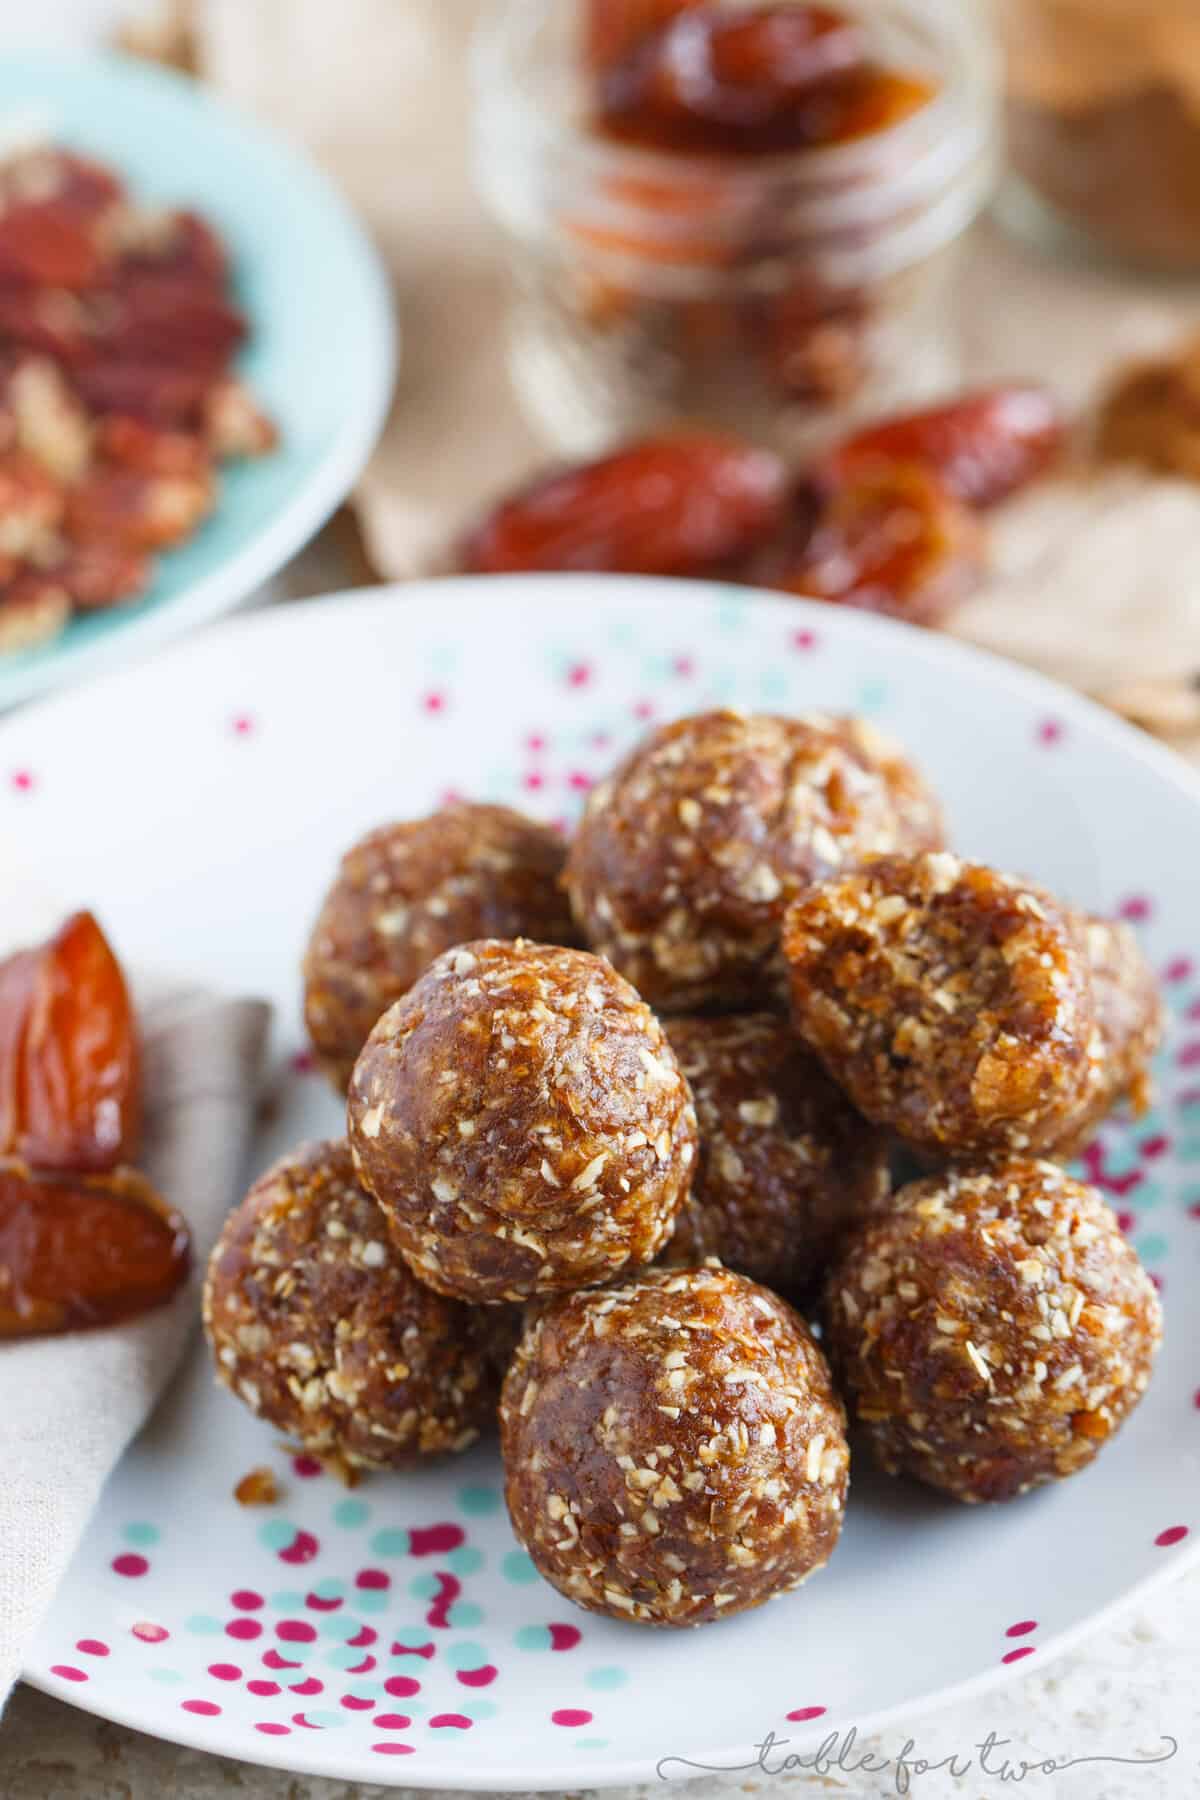 These pumpkin pie energy snack balls are the perfect sweet treat for the season! They're naturally sweetened and will curb any sweet tooth but you won't feel bad about it!